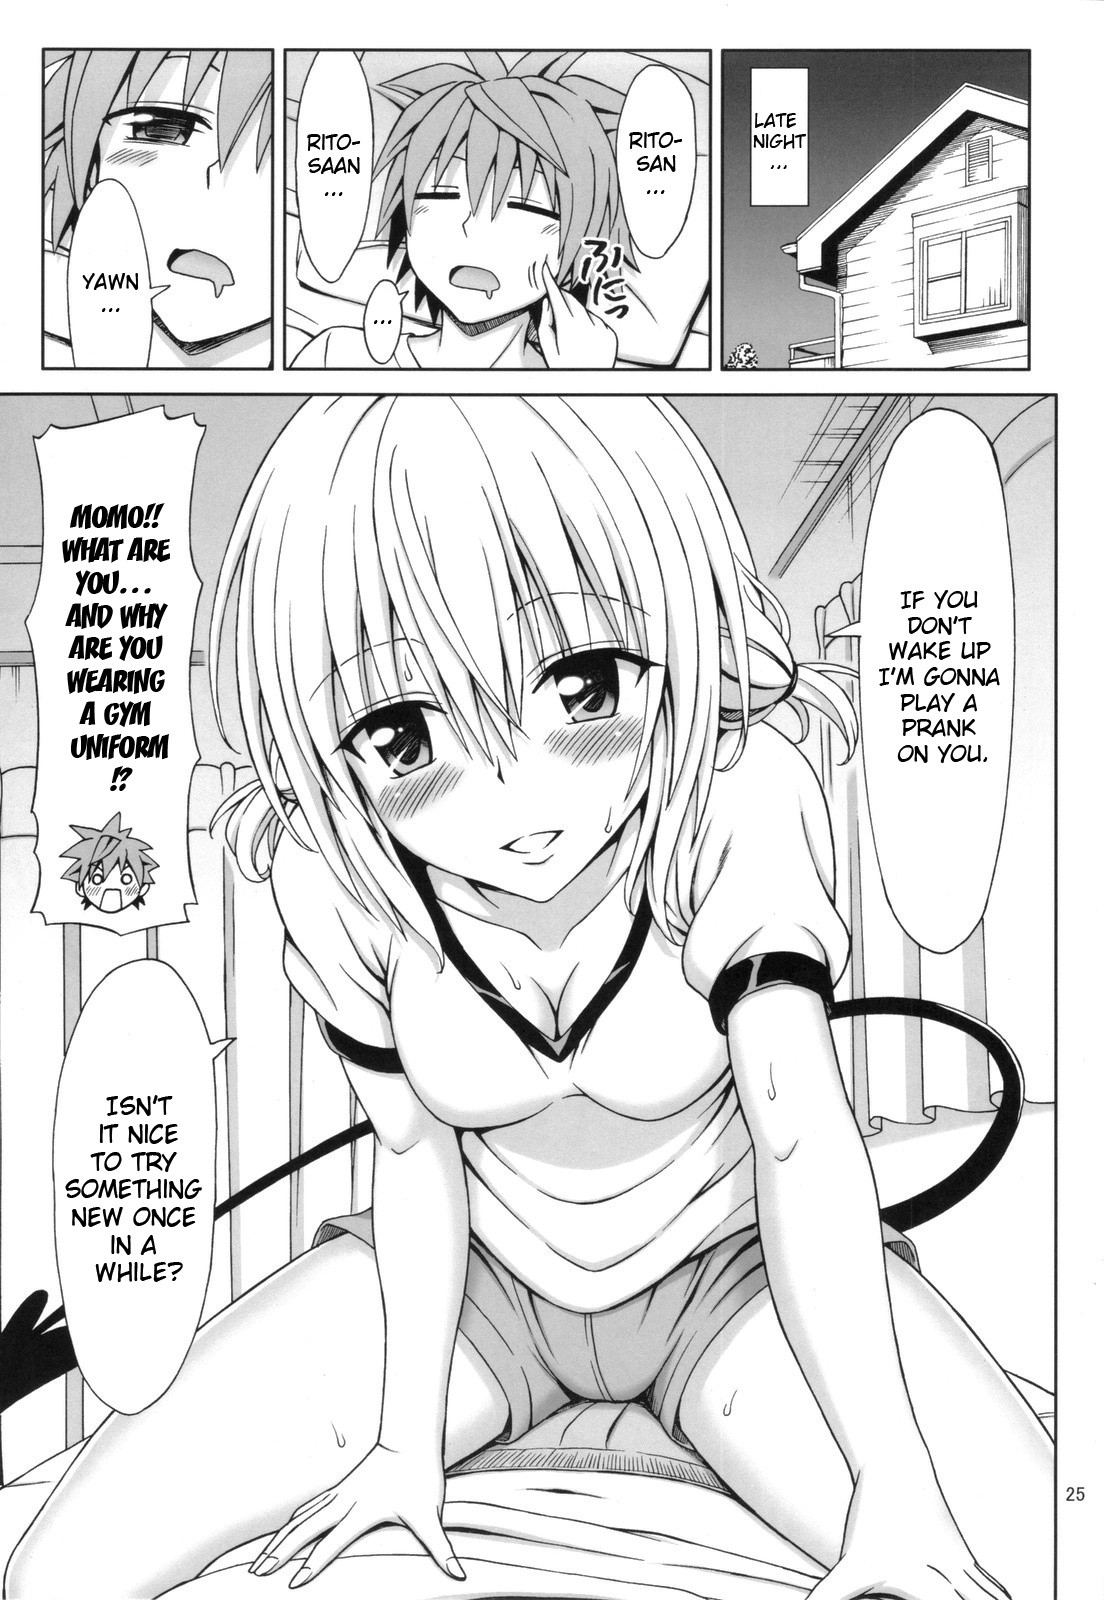 After-School Trouble hentai manga picture 24